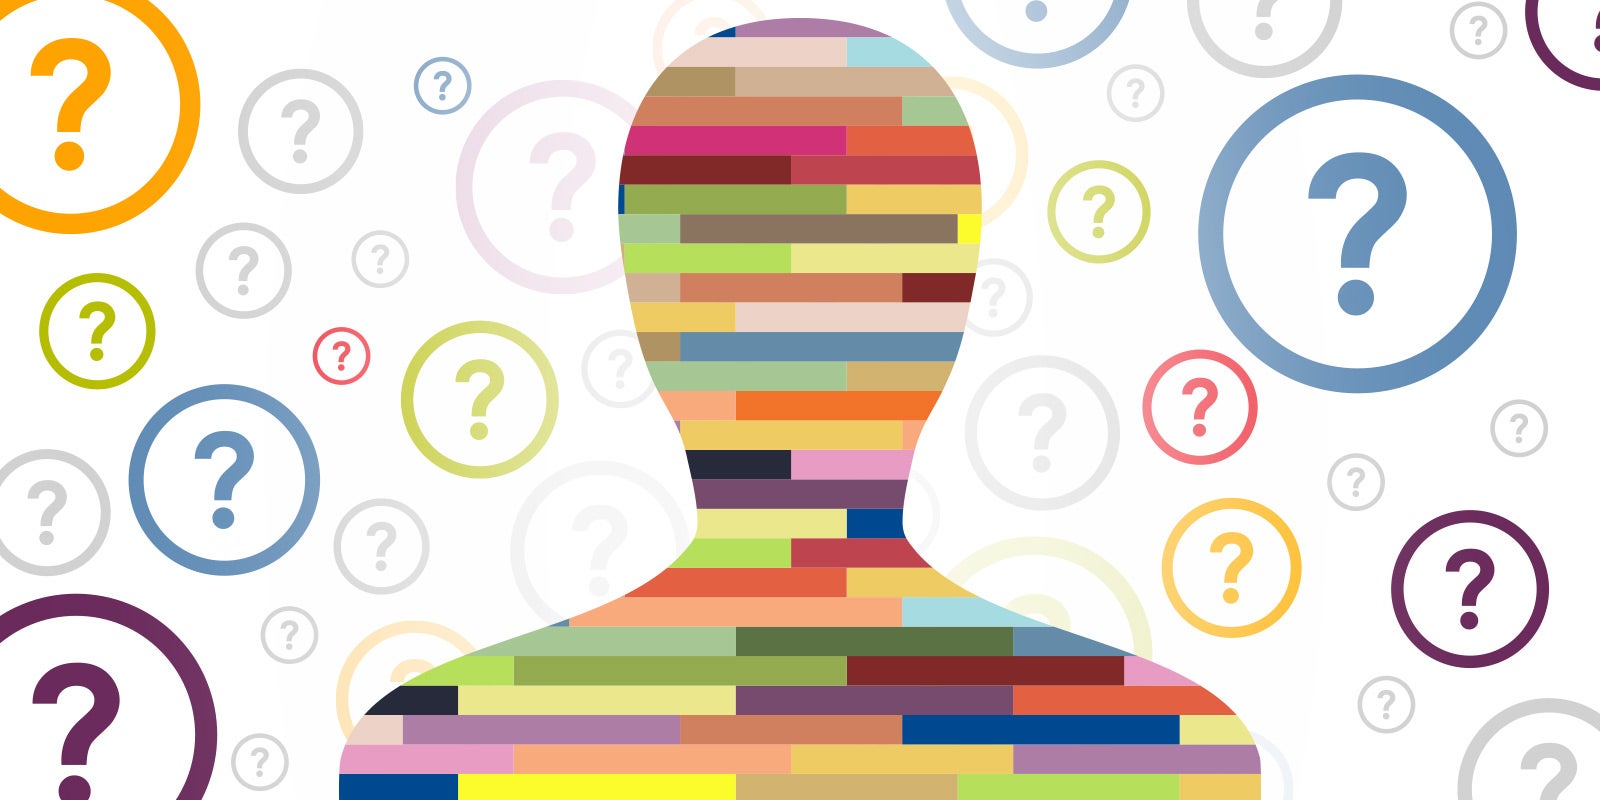 How to Use Personality Tests in the Workplace: 9 Rules of Thumb | DDI